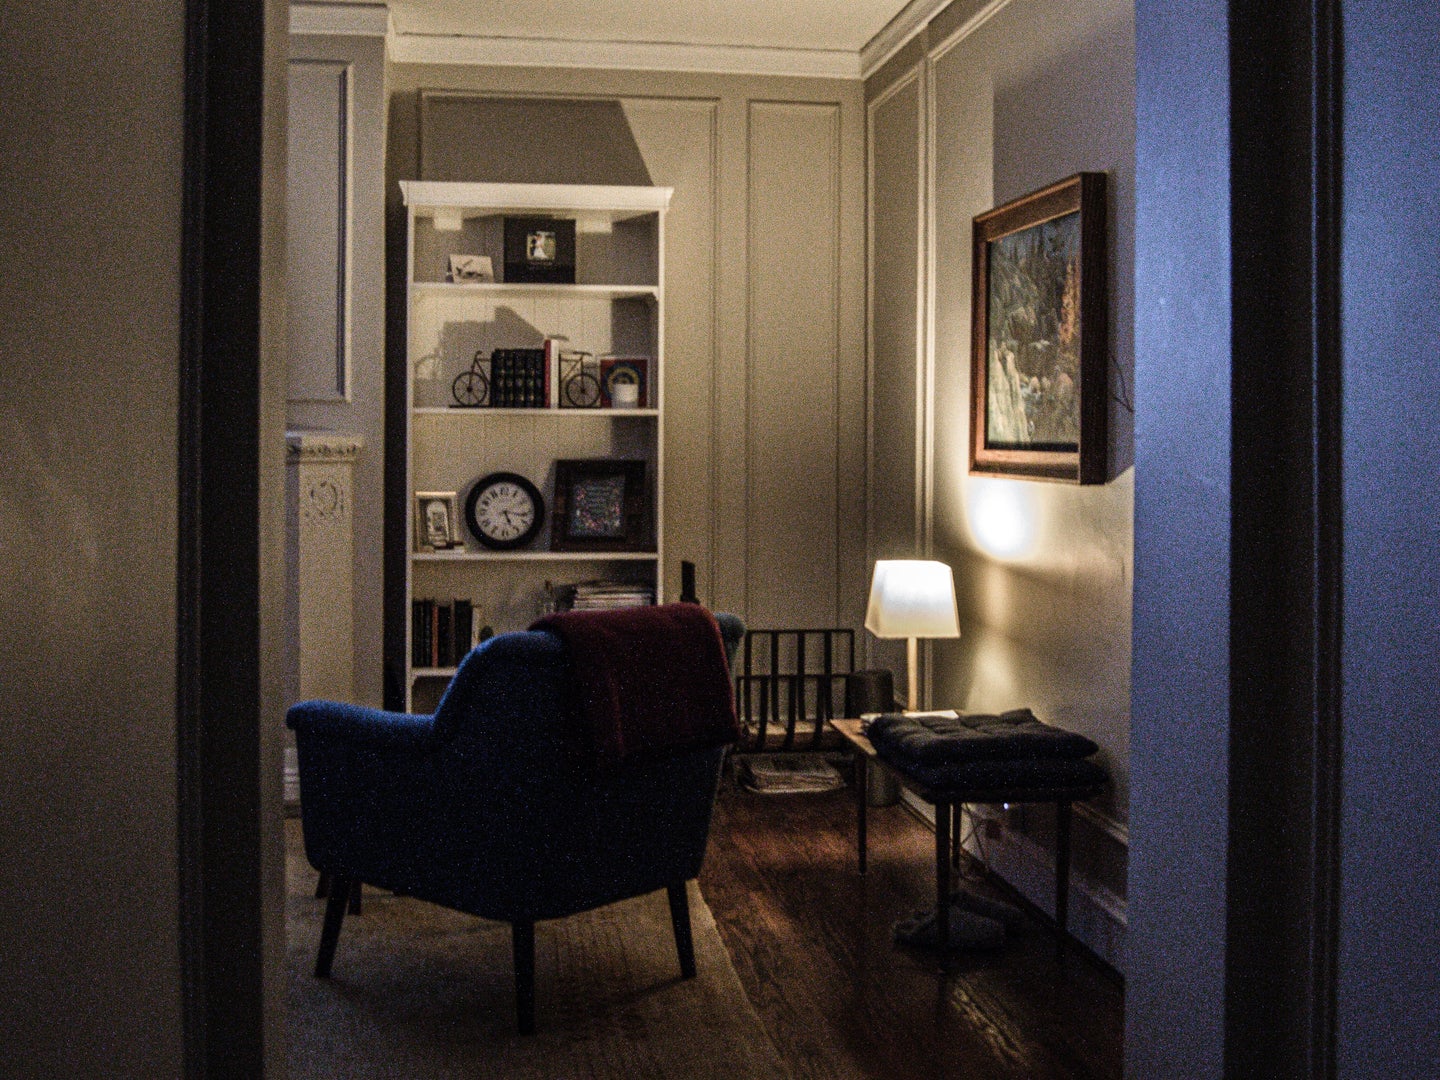 A room with white walls and a hardwood floor with a small lamp in the corner that's lighting the area around a blue armchair.